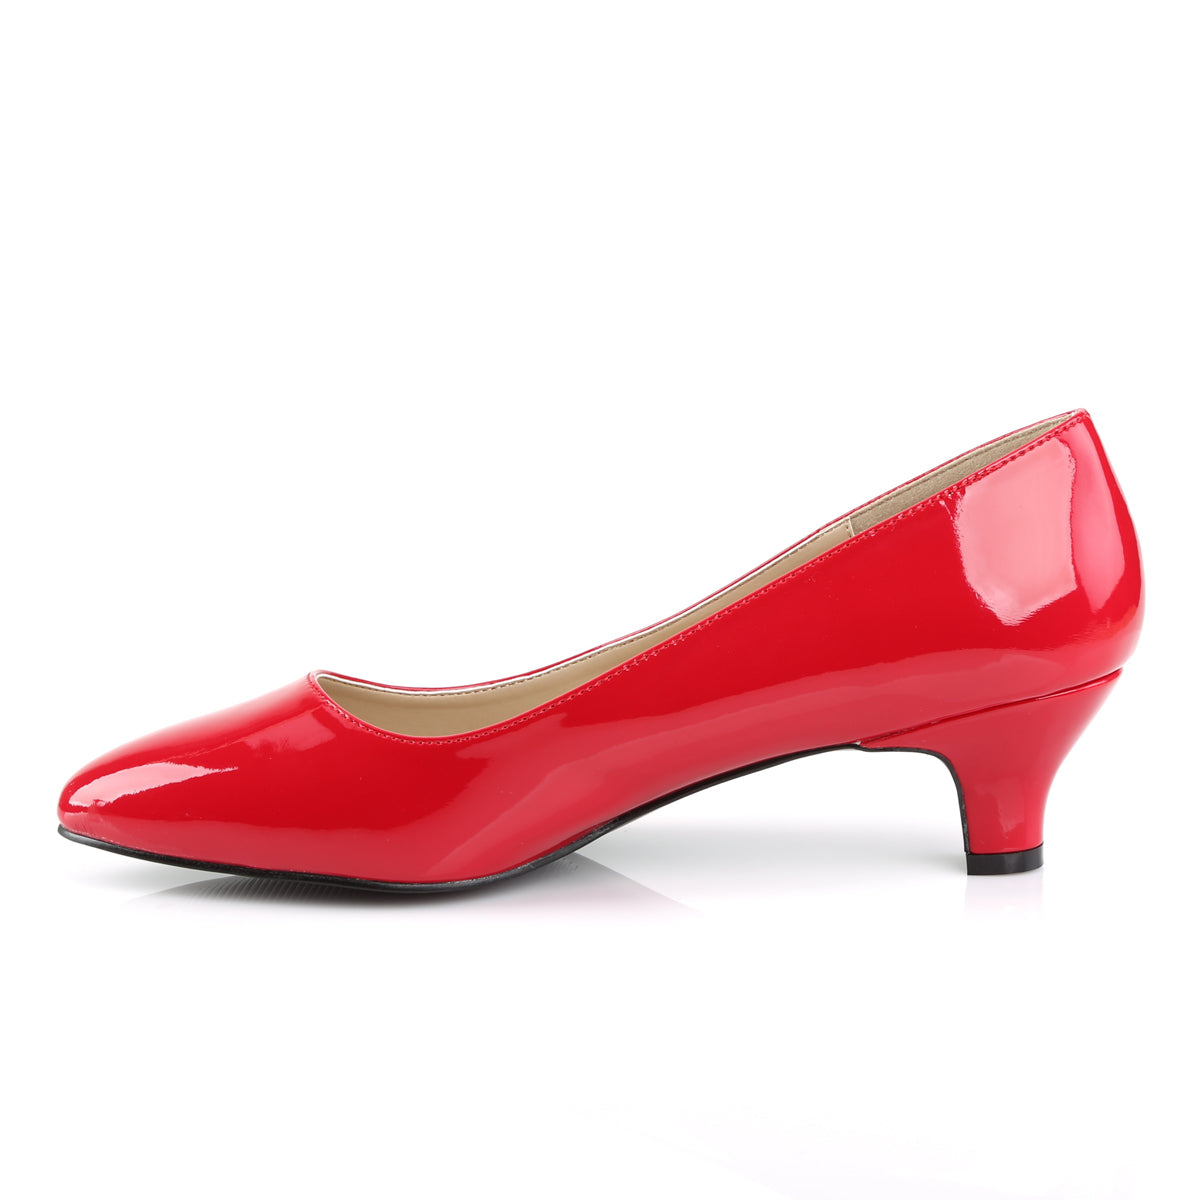 Pleaser Pink Label Womens Pumps FAB-420 Red Pat